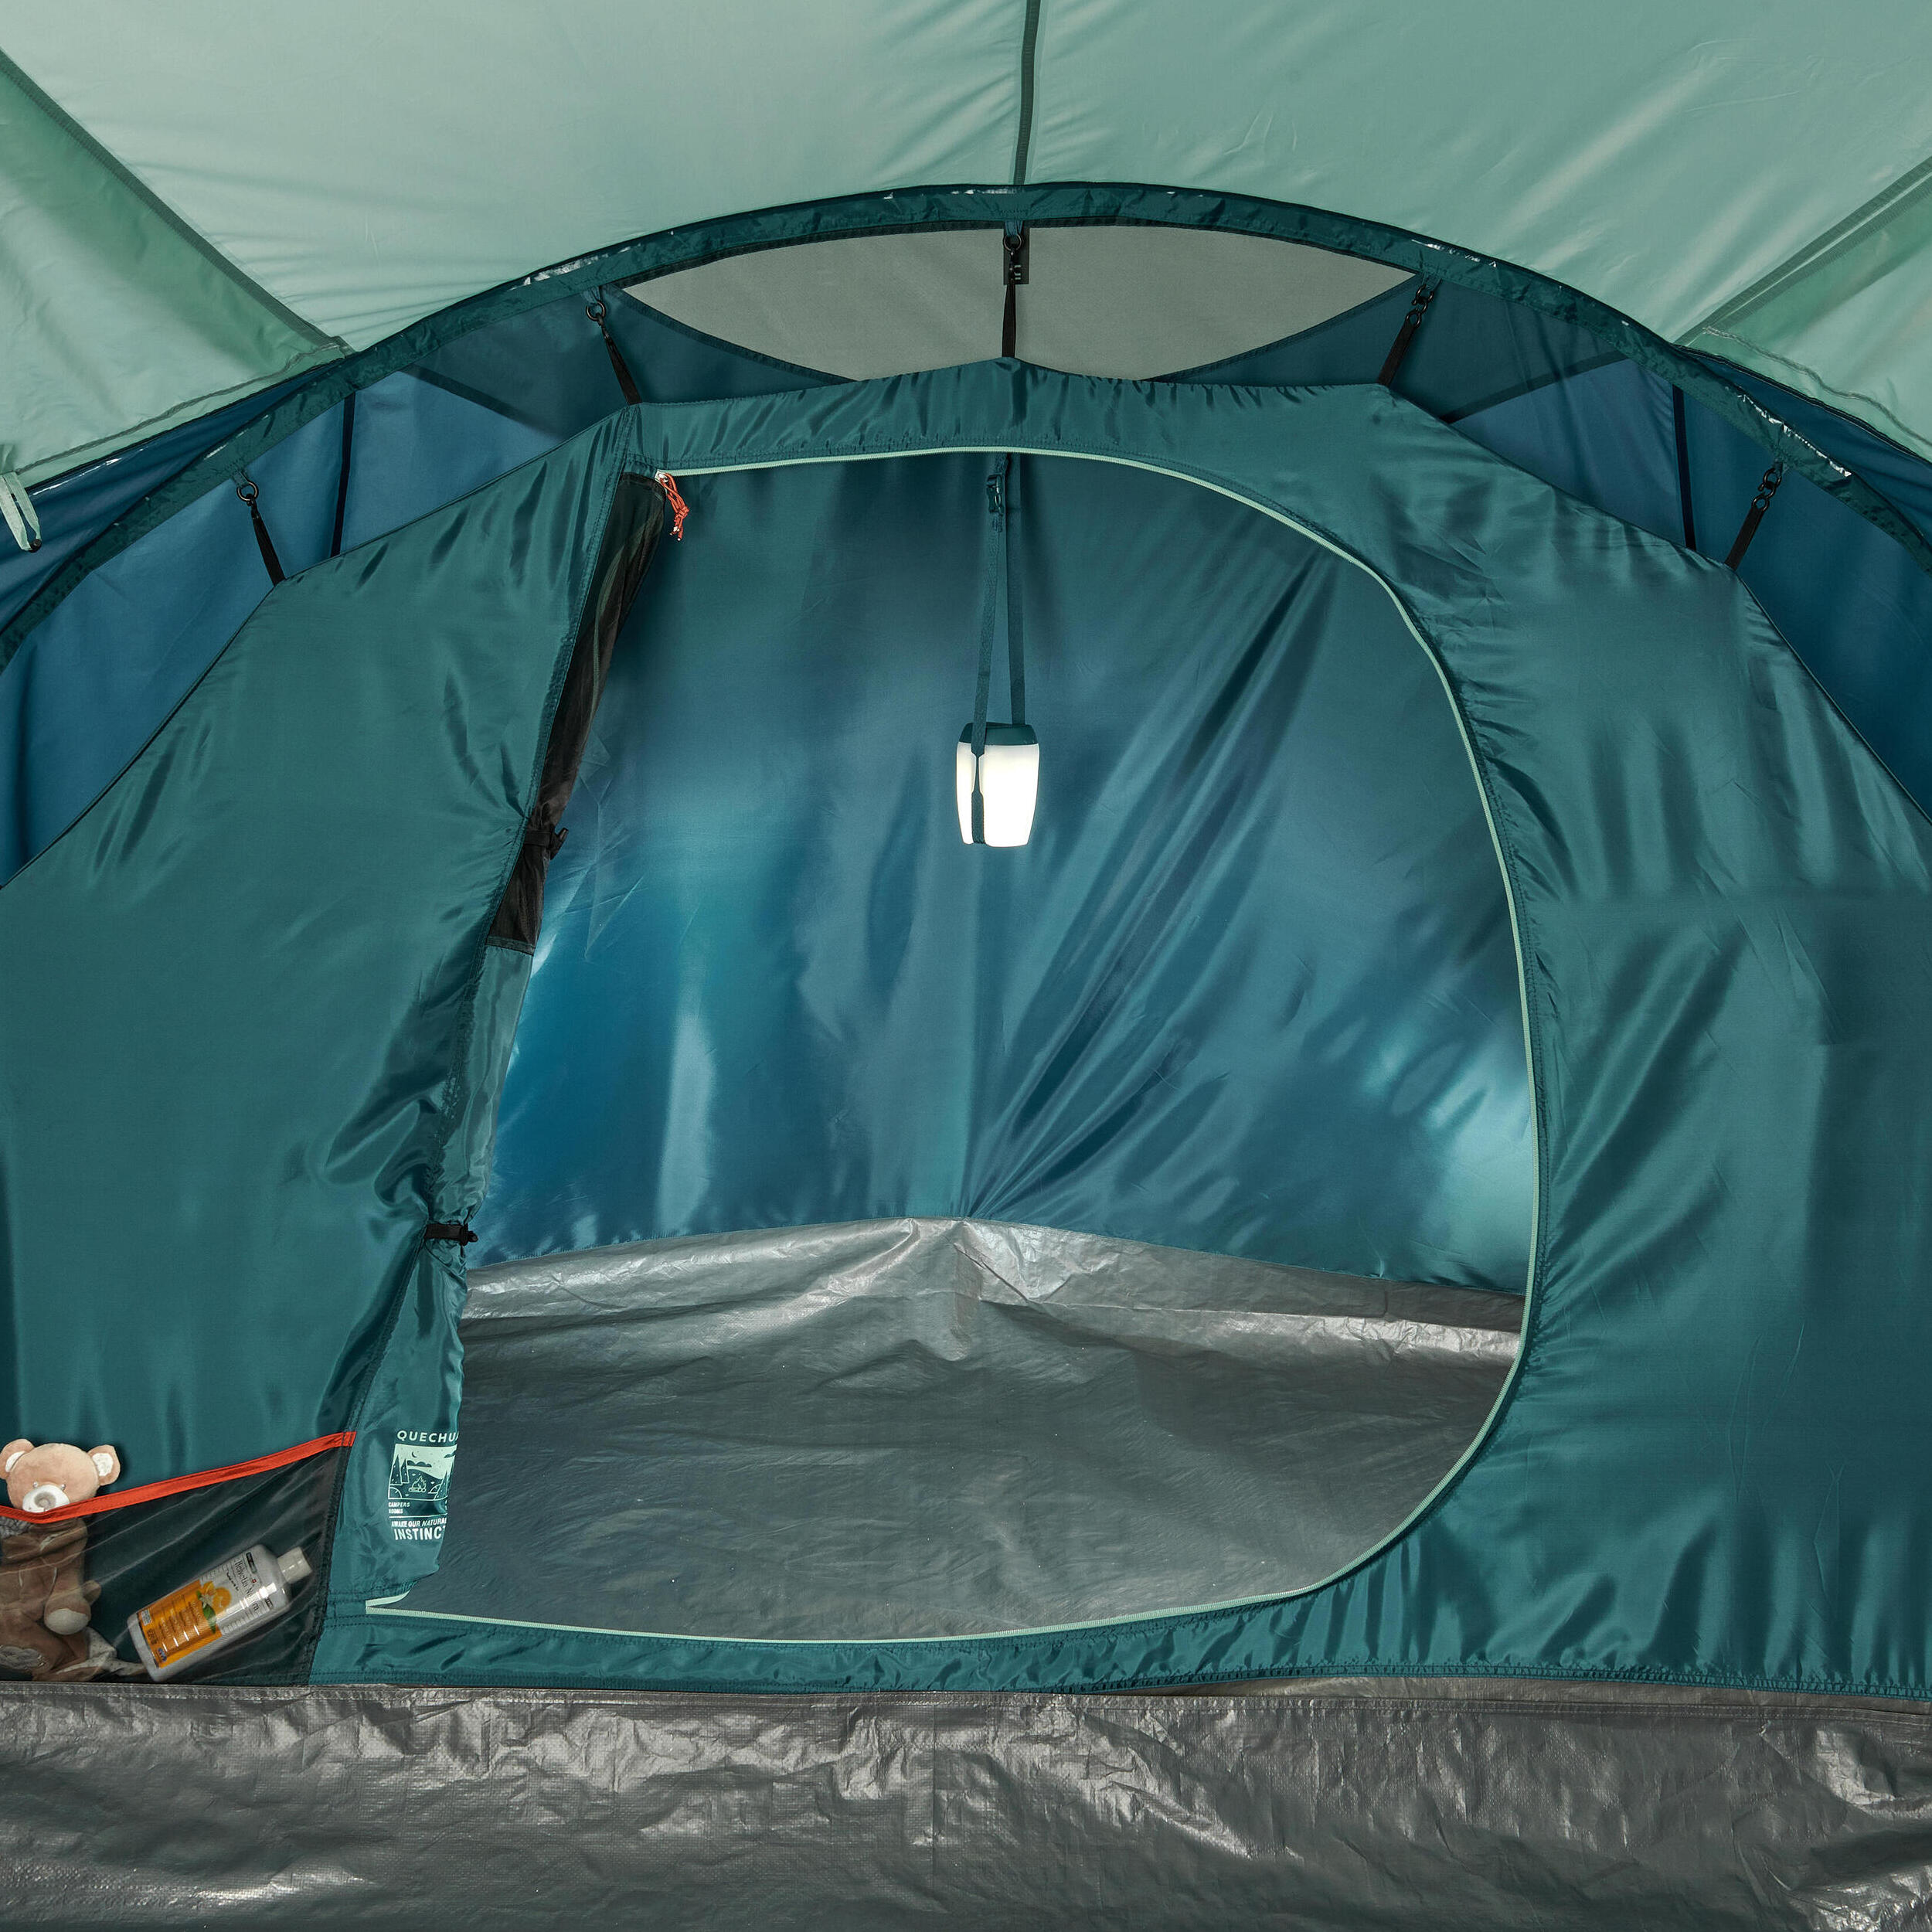 BEDROOM - SPARE PART FOR THE ARPENAZ 6.3 TENT 1/3